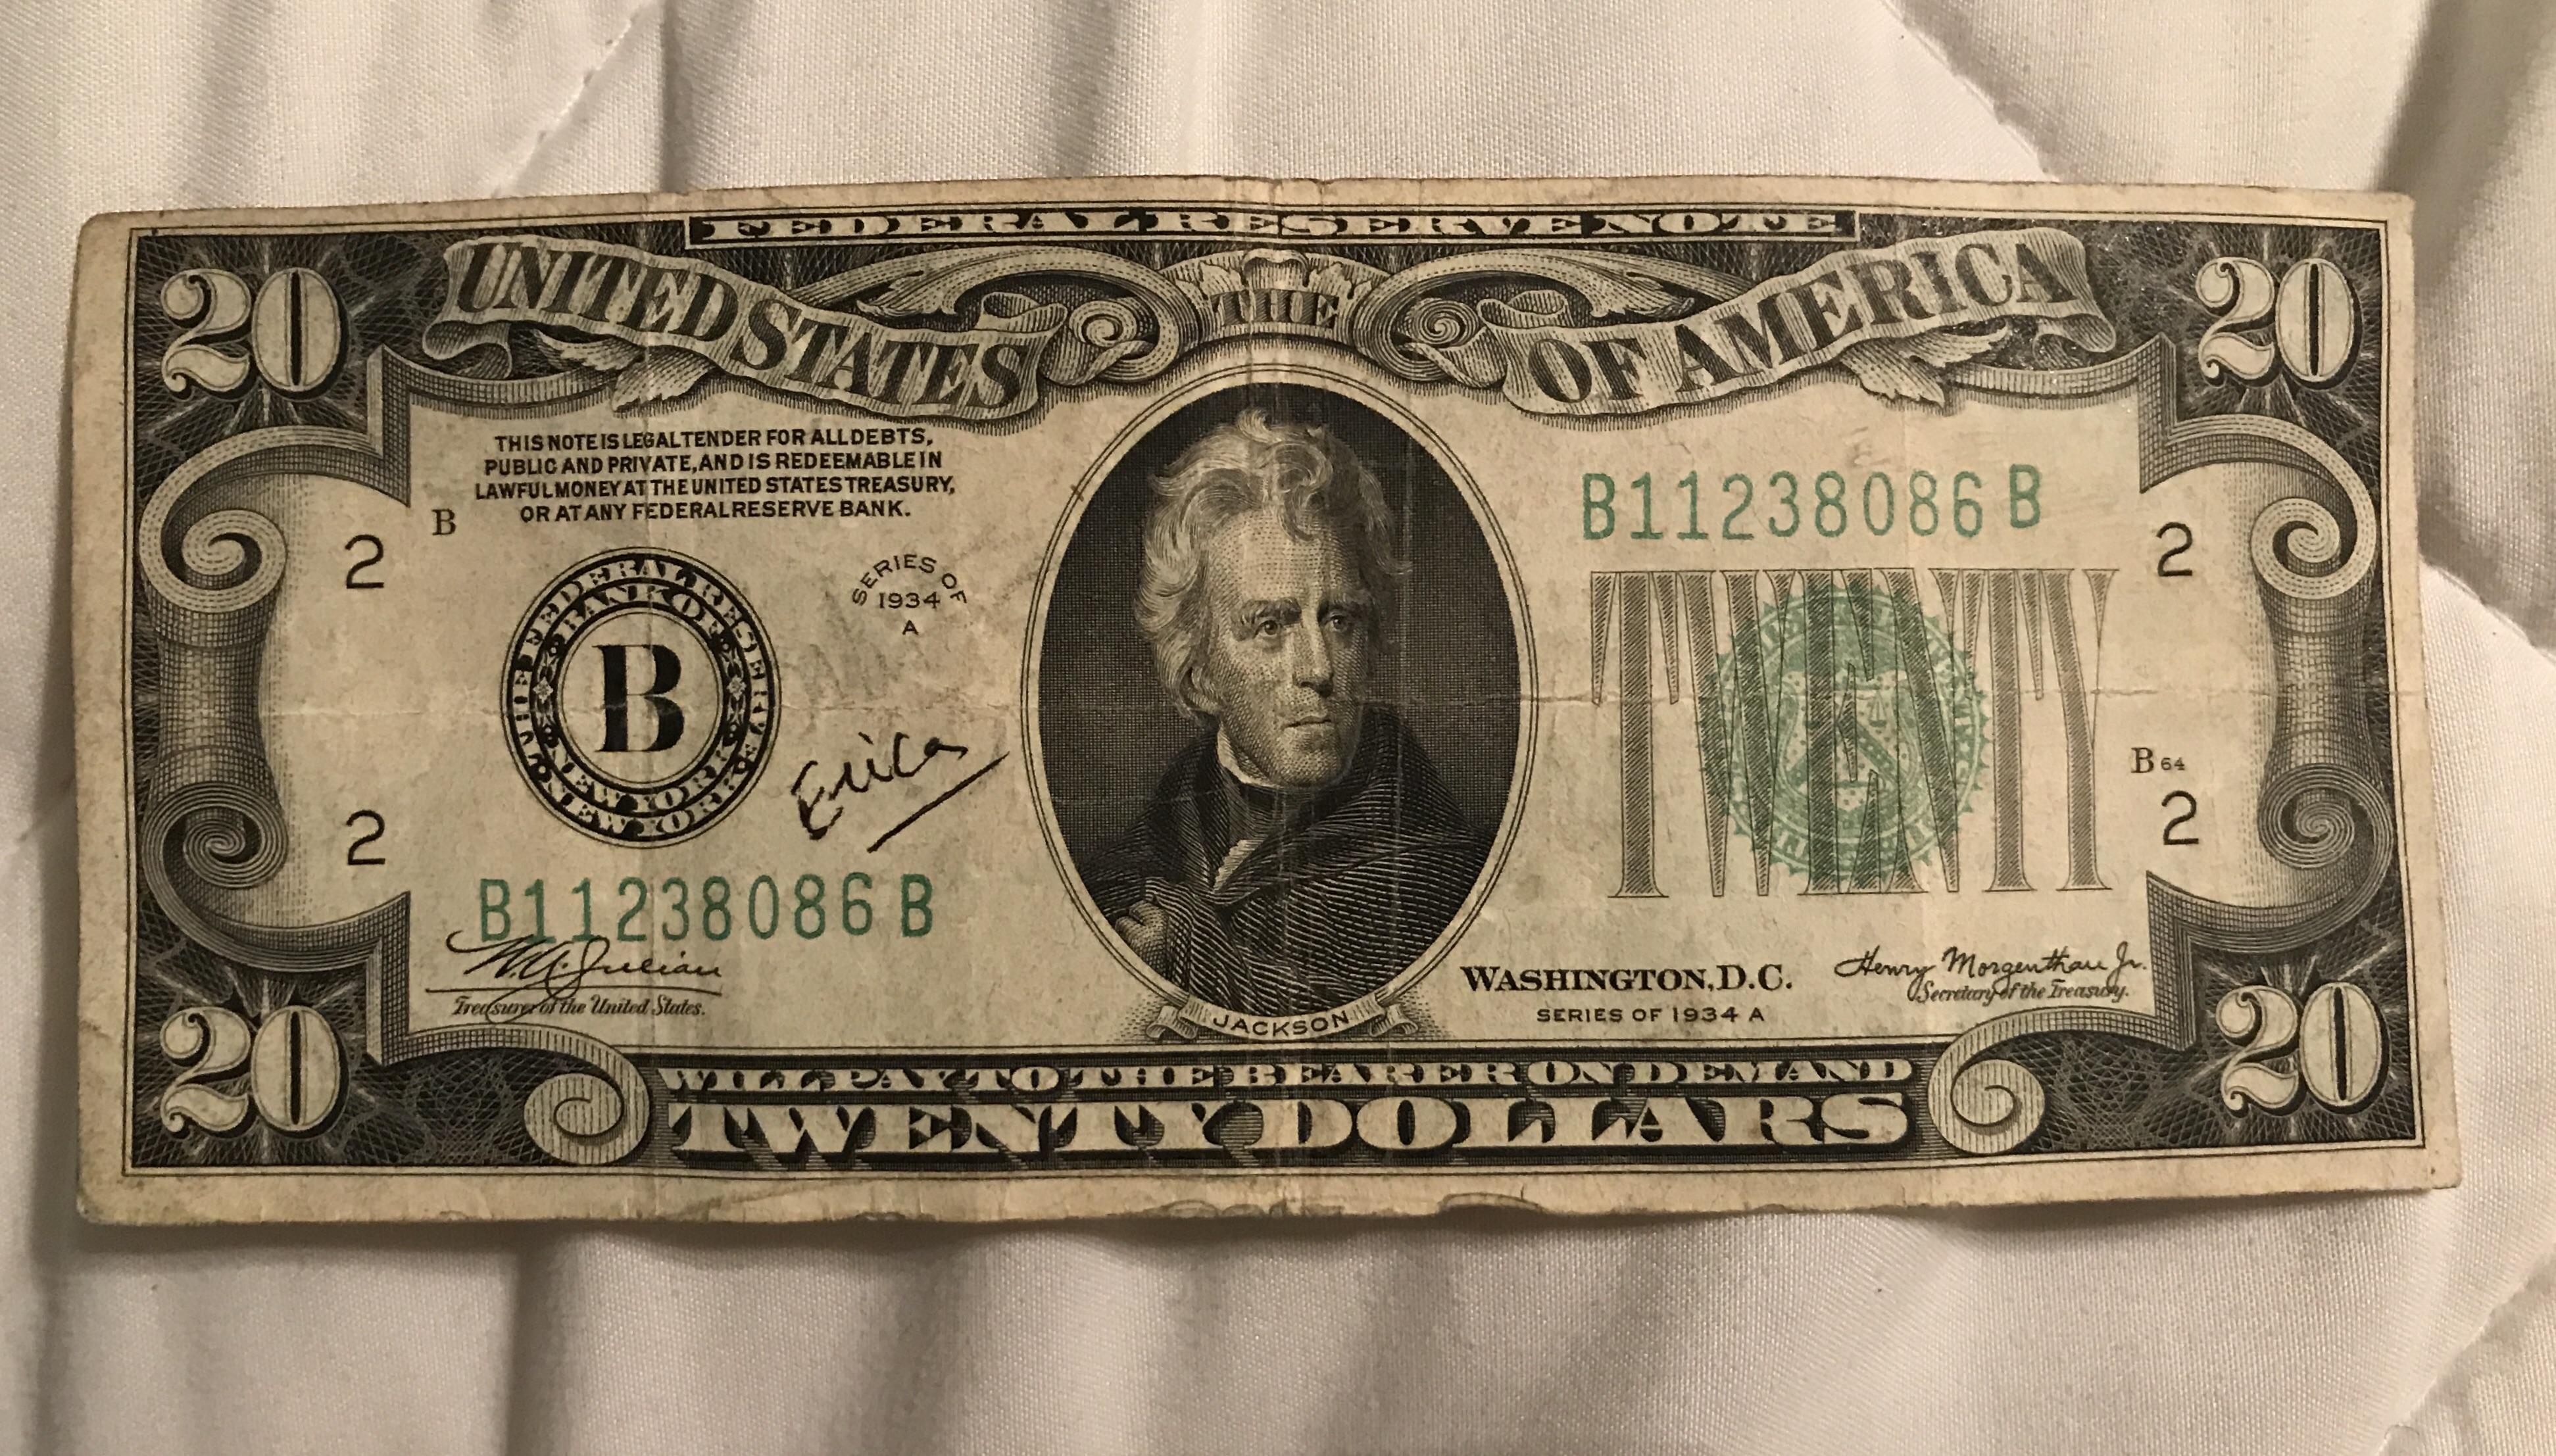 What is a 1934 $20 bill worth